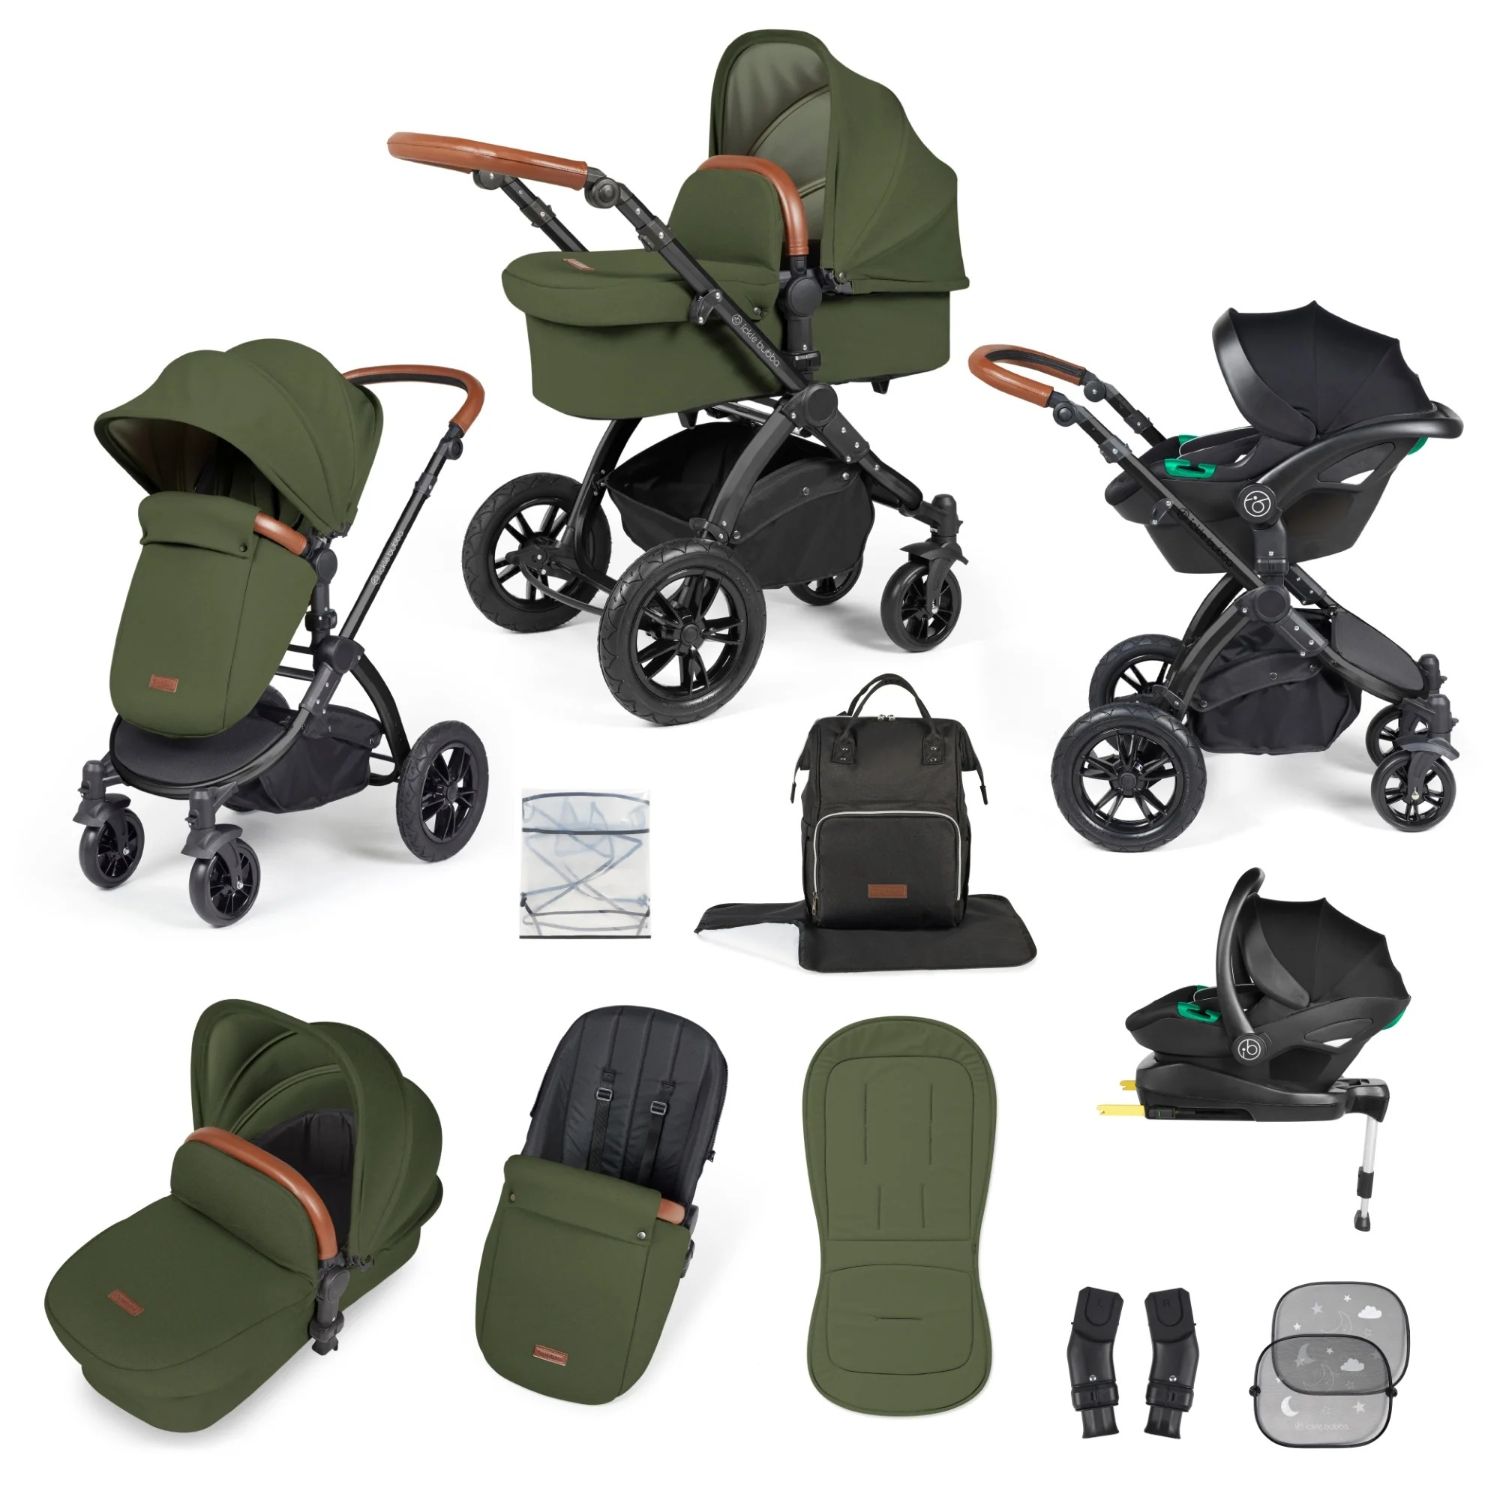 Ickle Bubba Stomp Luxe All-in-One Travel System with Stratus i-Size Car Seat and ISOFIX Base and accessories in Woodland green colour with tan handle